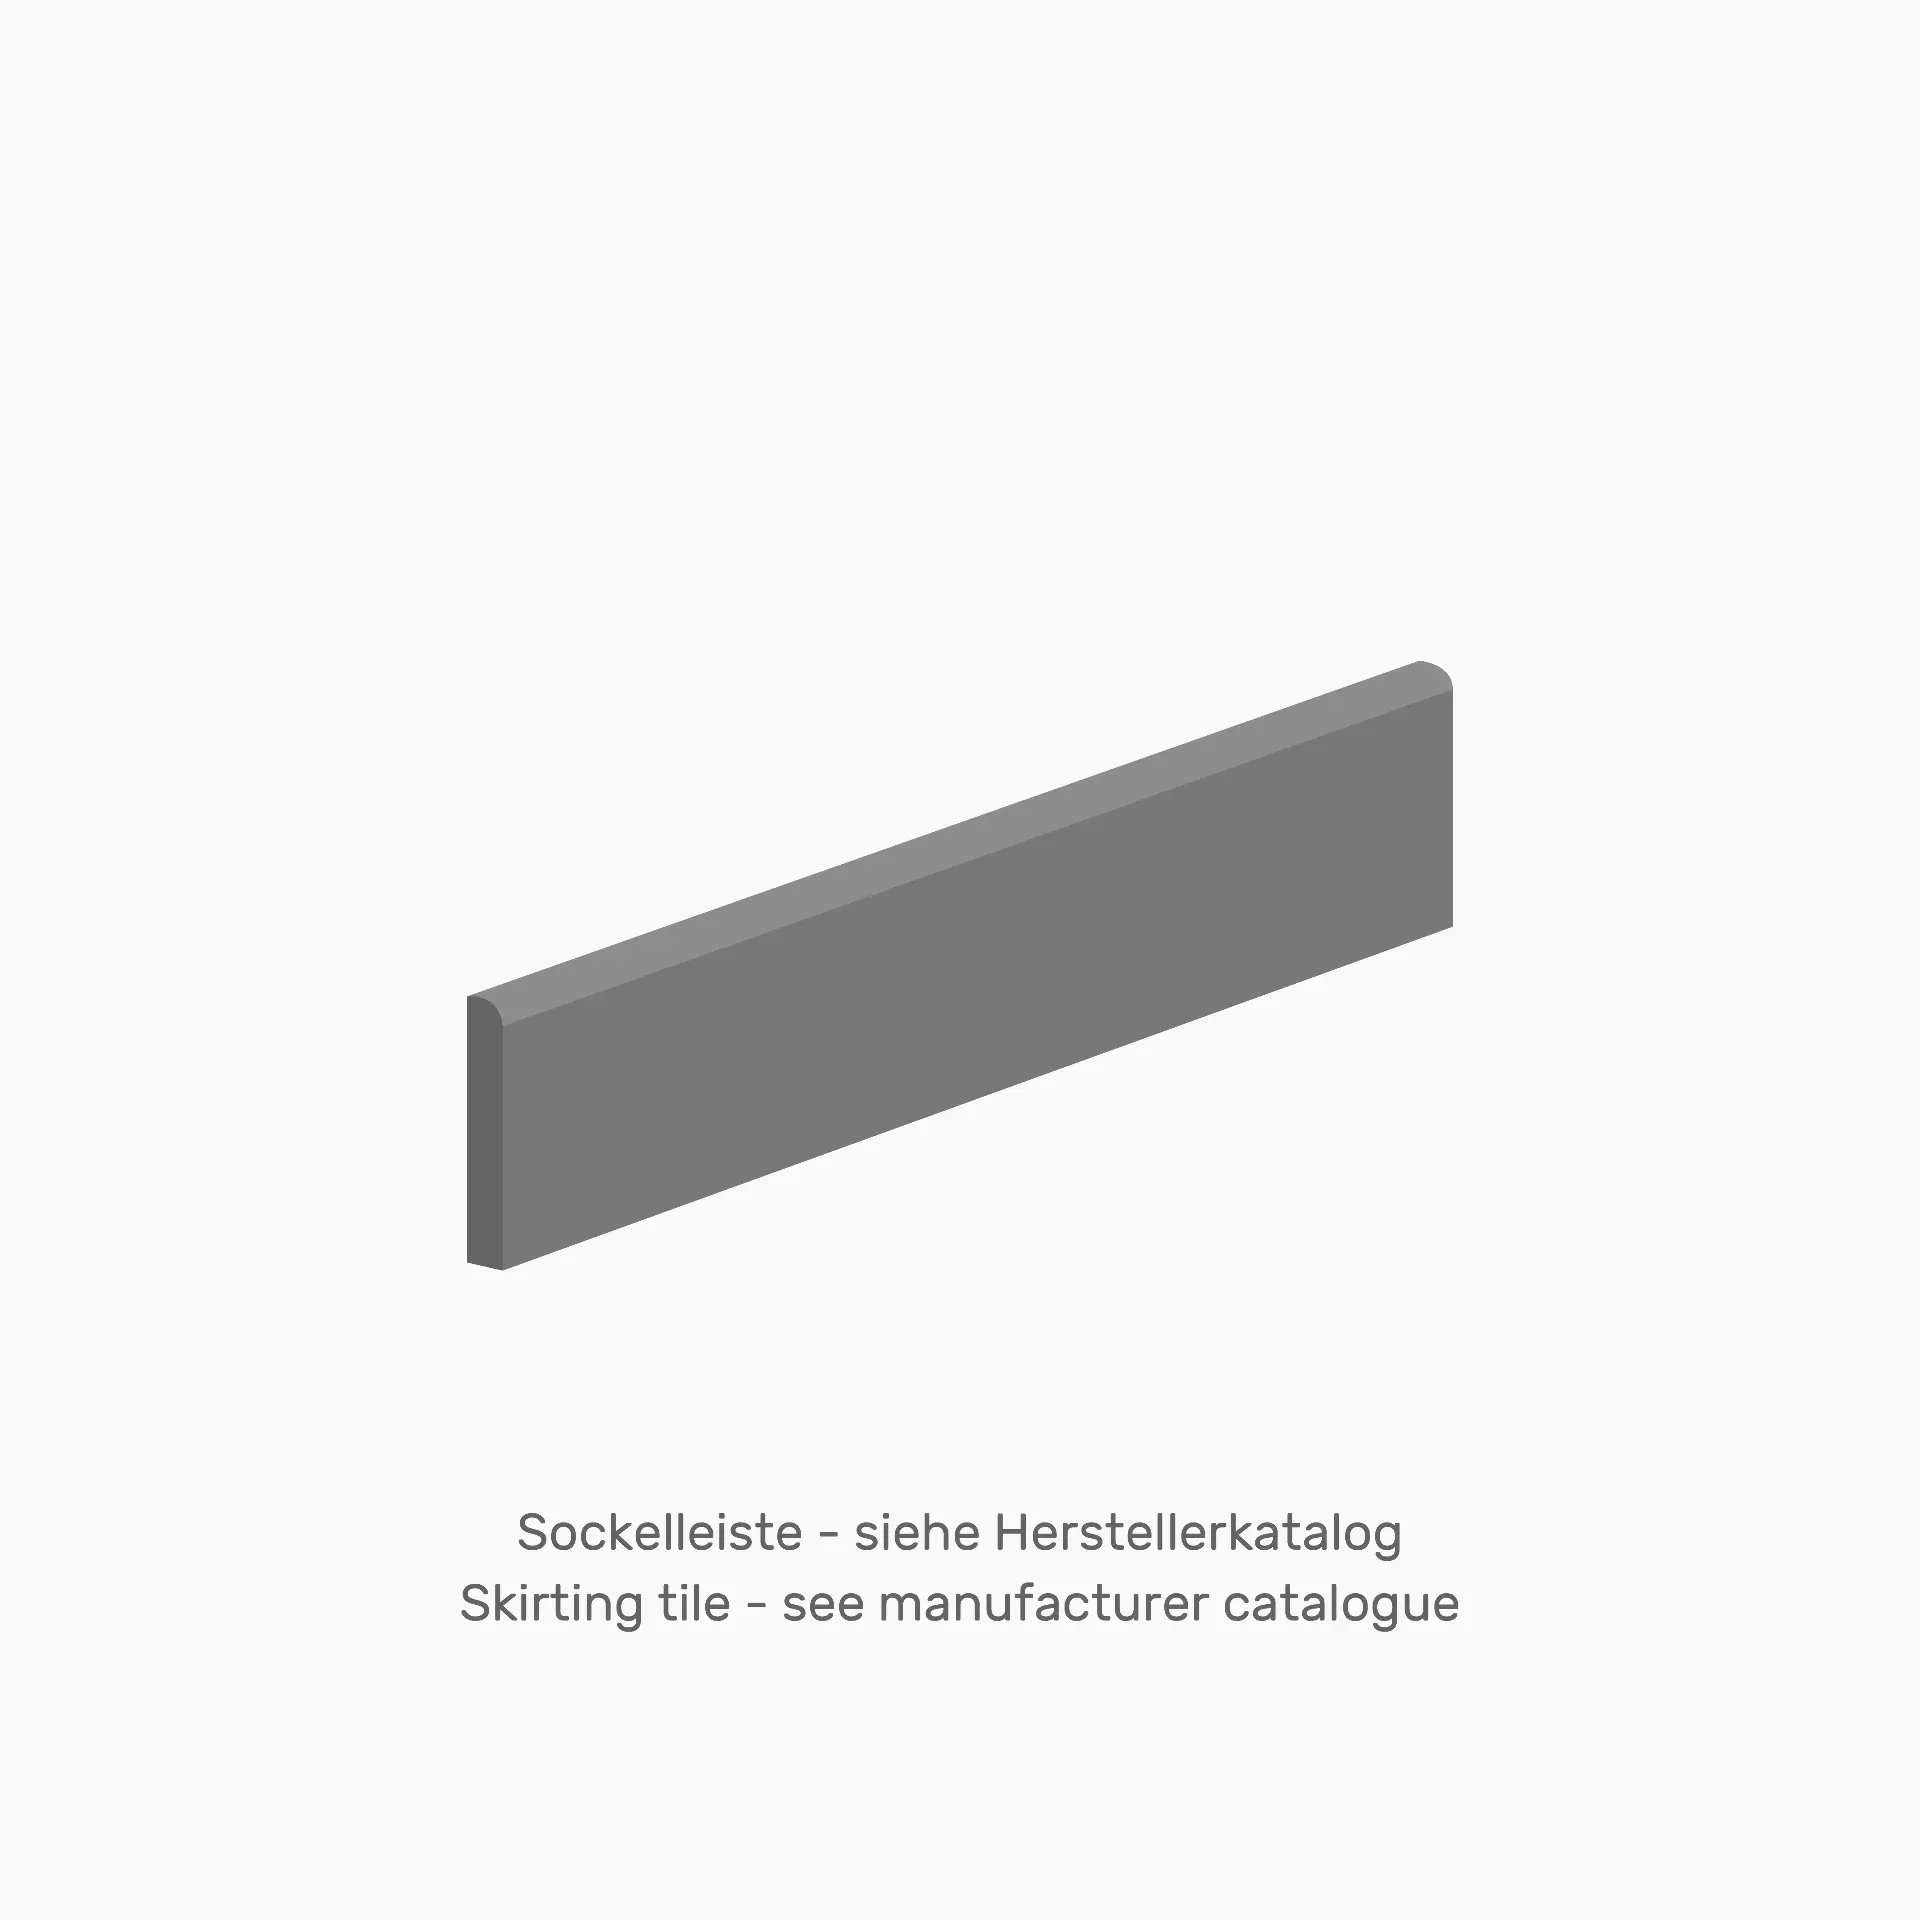 Emilceramica Forme Bianco Silktech Skirting board EMS5 7x80cm rectified 9mm